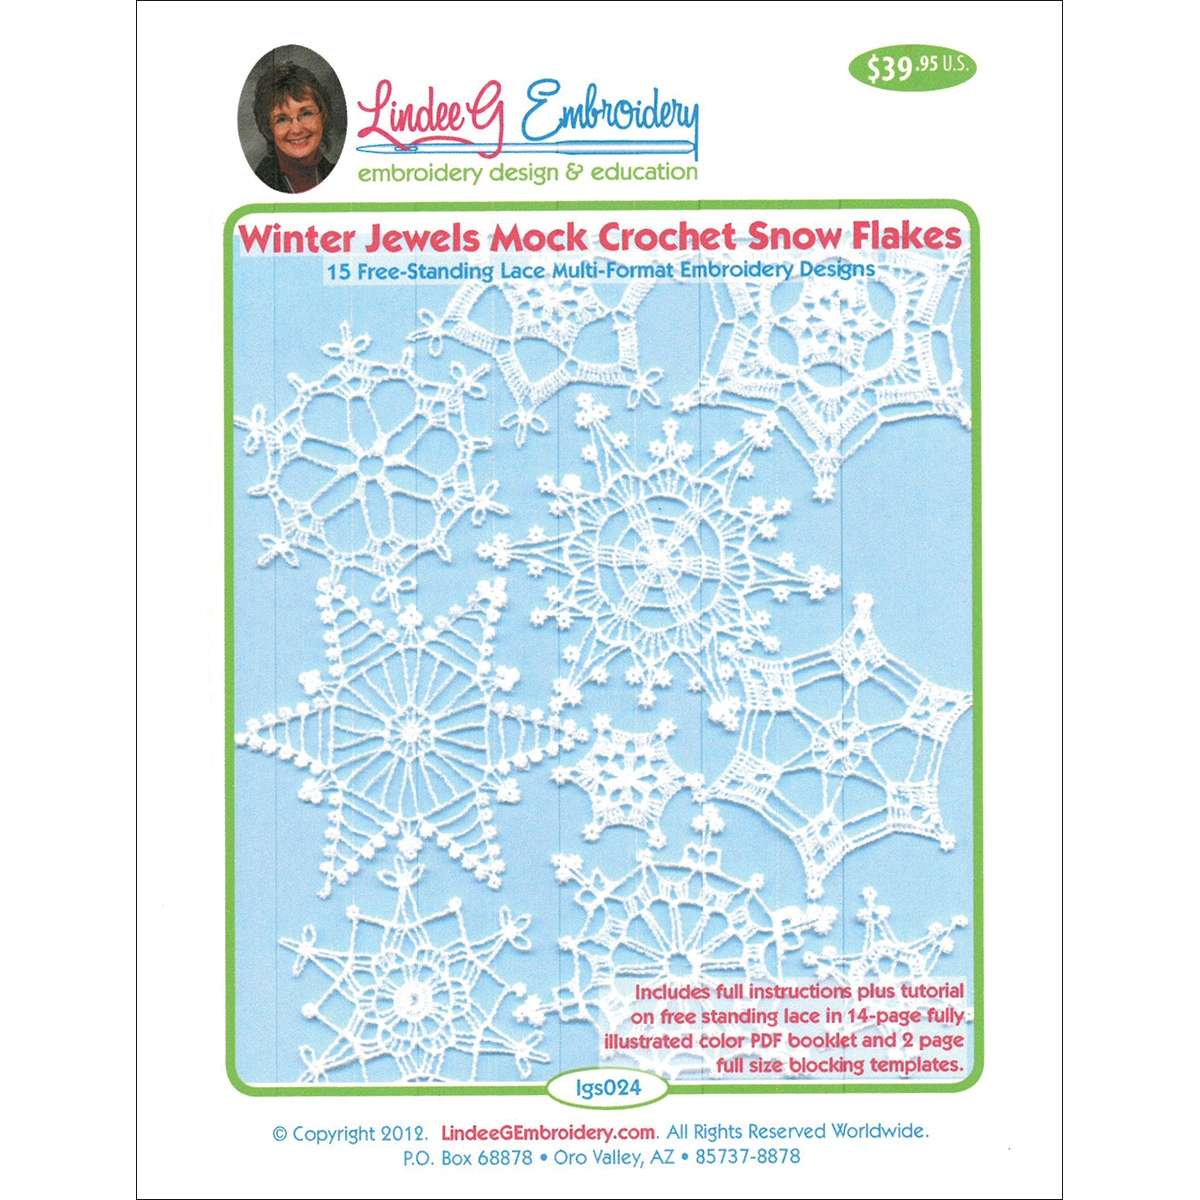 Free Paper Embroidery Patterns And Instructions Winter Jewels Mock Crochet Snow Flakes Embroidery Designs